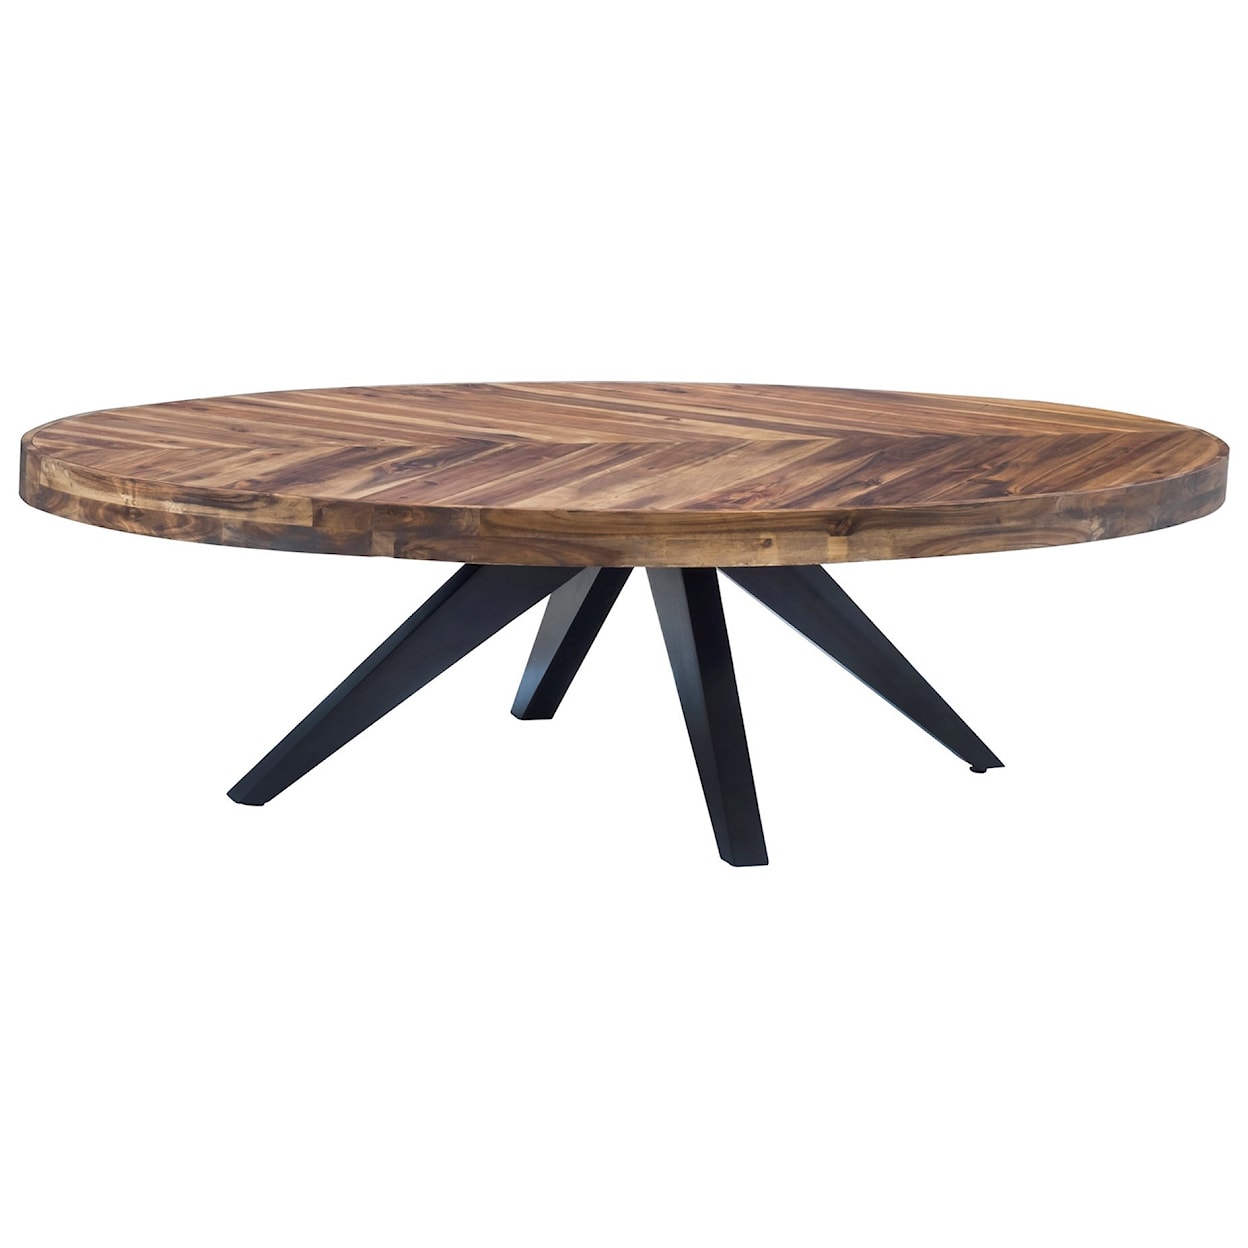 Moe's Home Collection Parq Oval Coffee Table